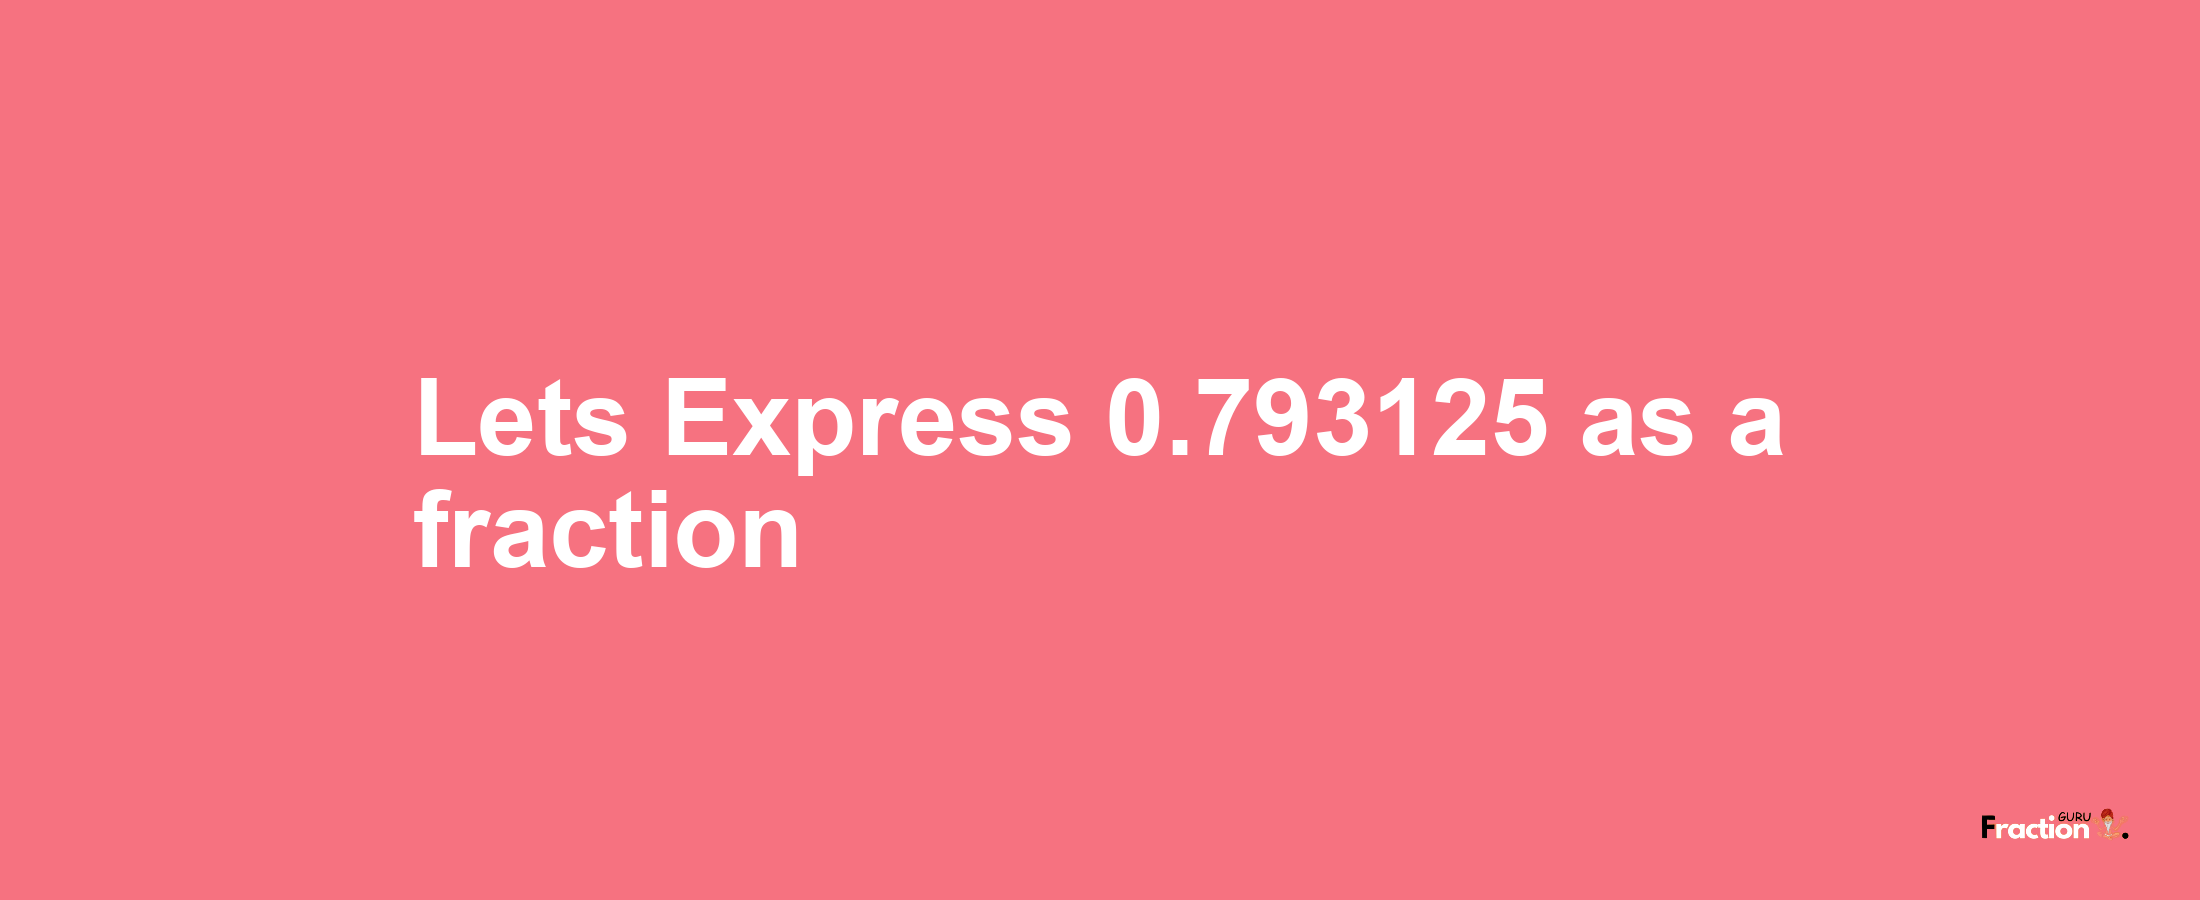 Lets Express 0.793125 as afraction